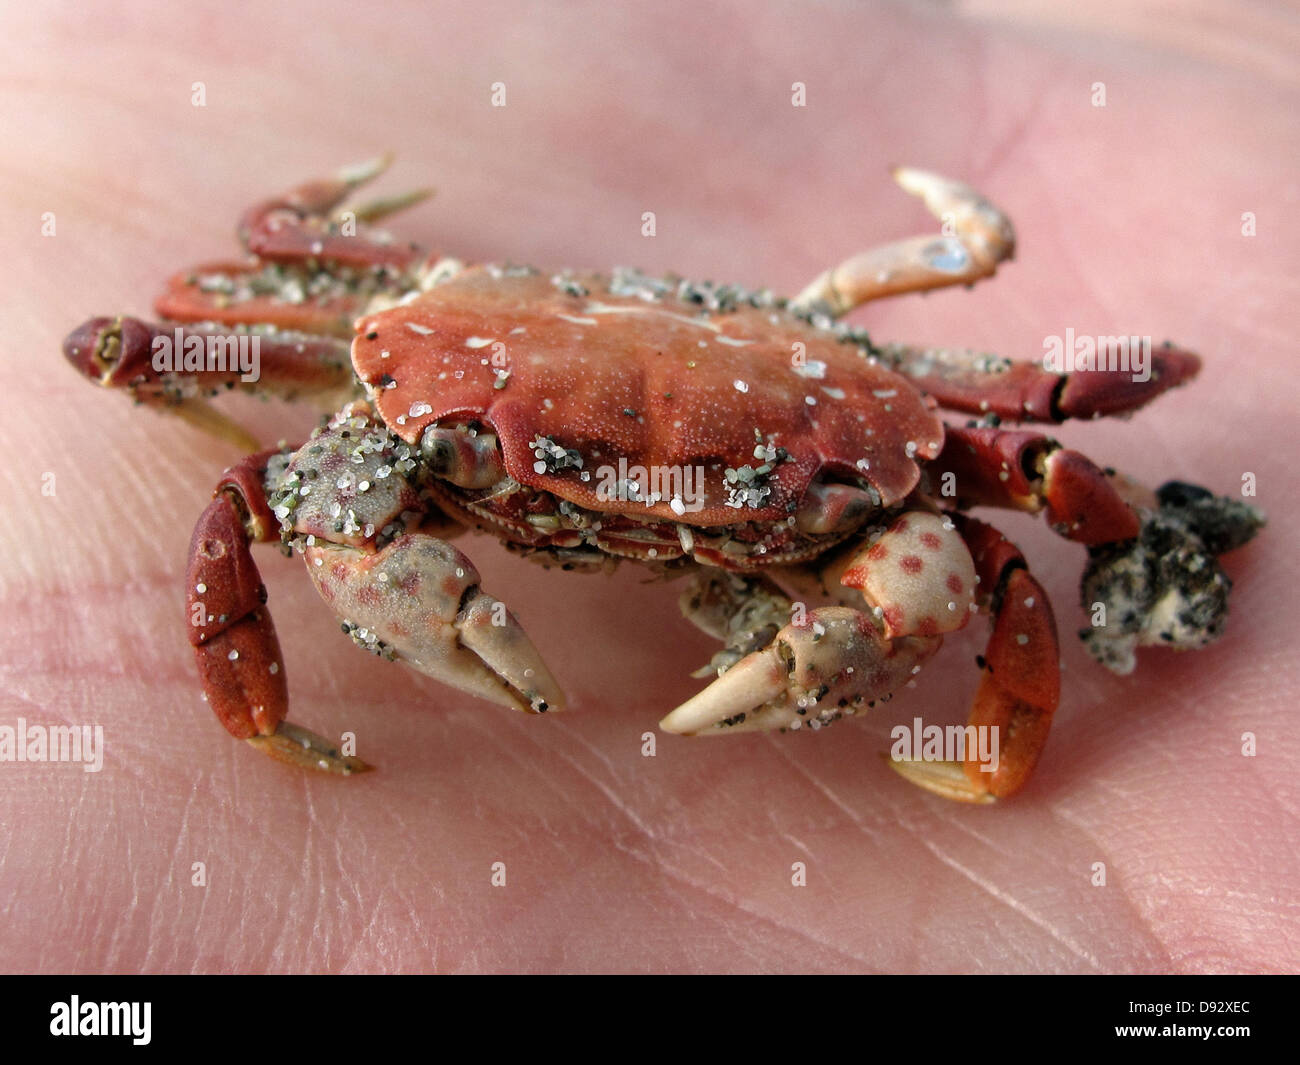 A sandy crab on a human palm, close-up focus on crab Stock Photo